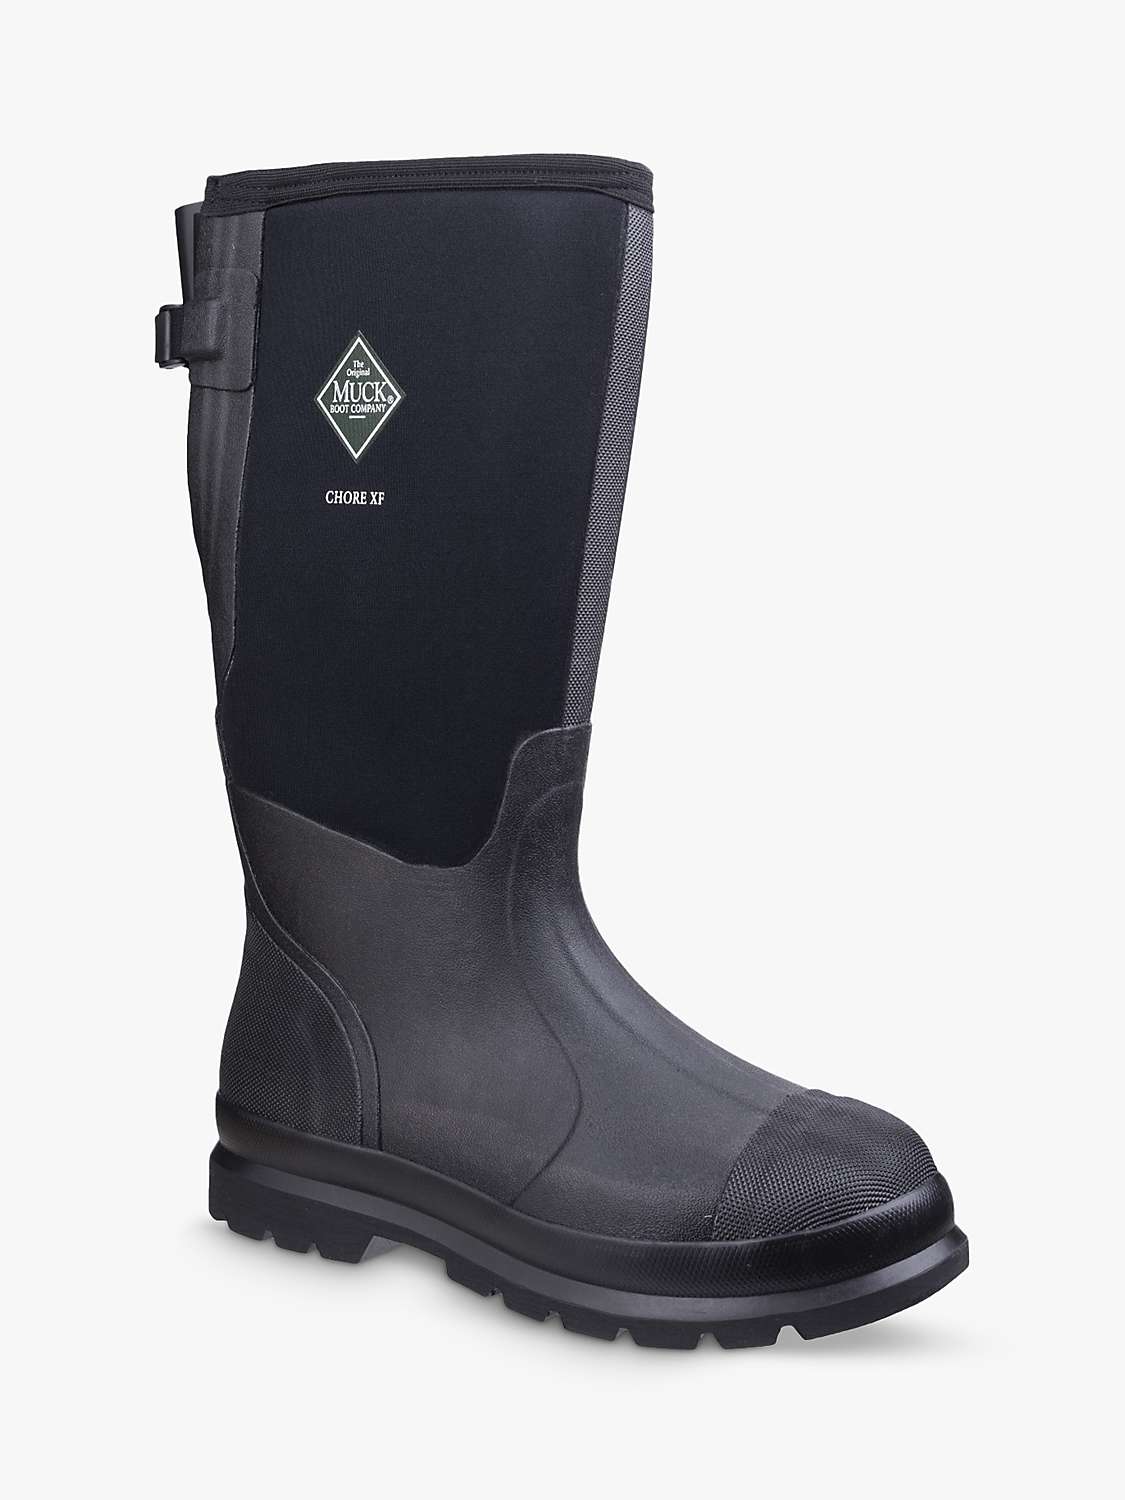 Buy Muck Chore XF Gusset Classic Work Boots, Black Online at johnlewis.com